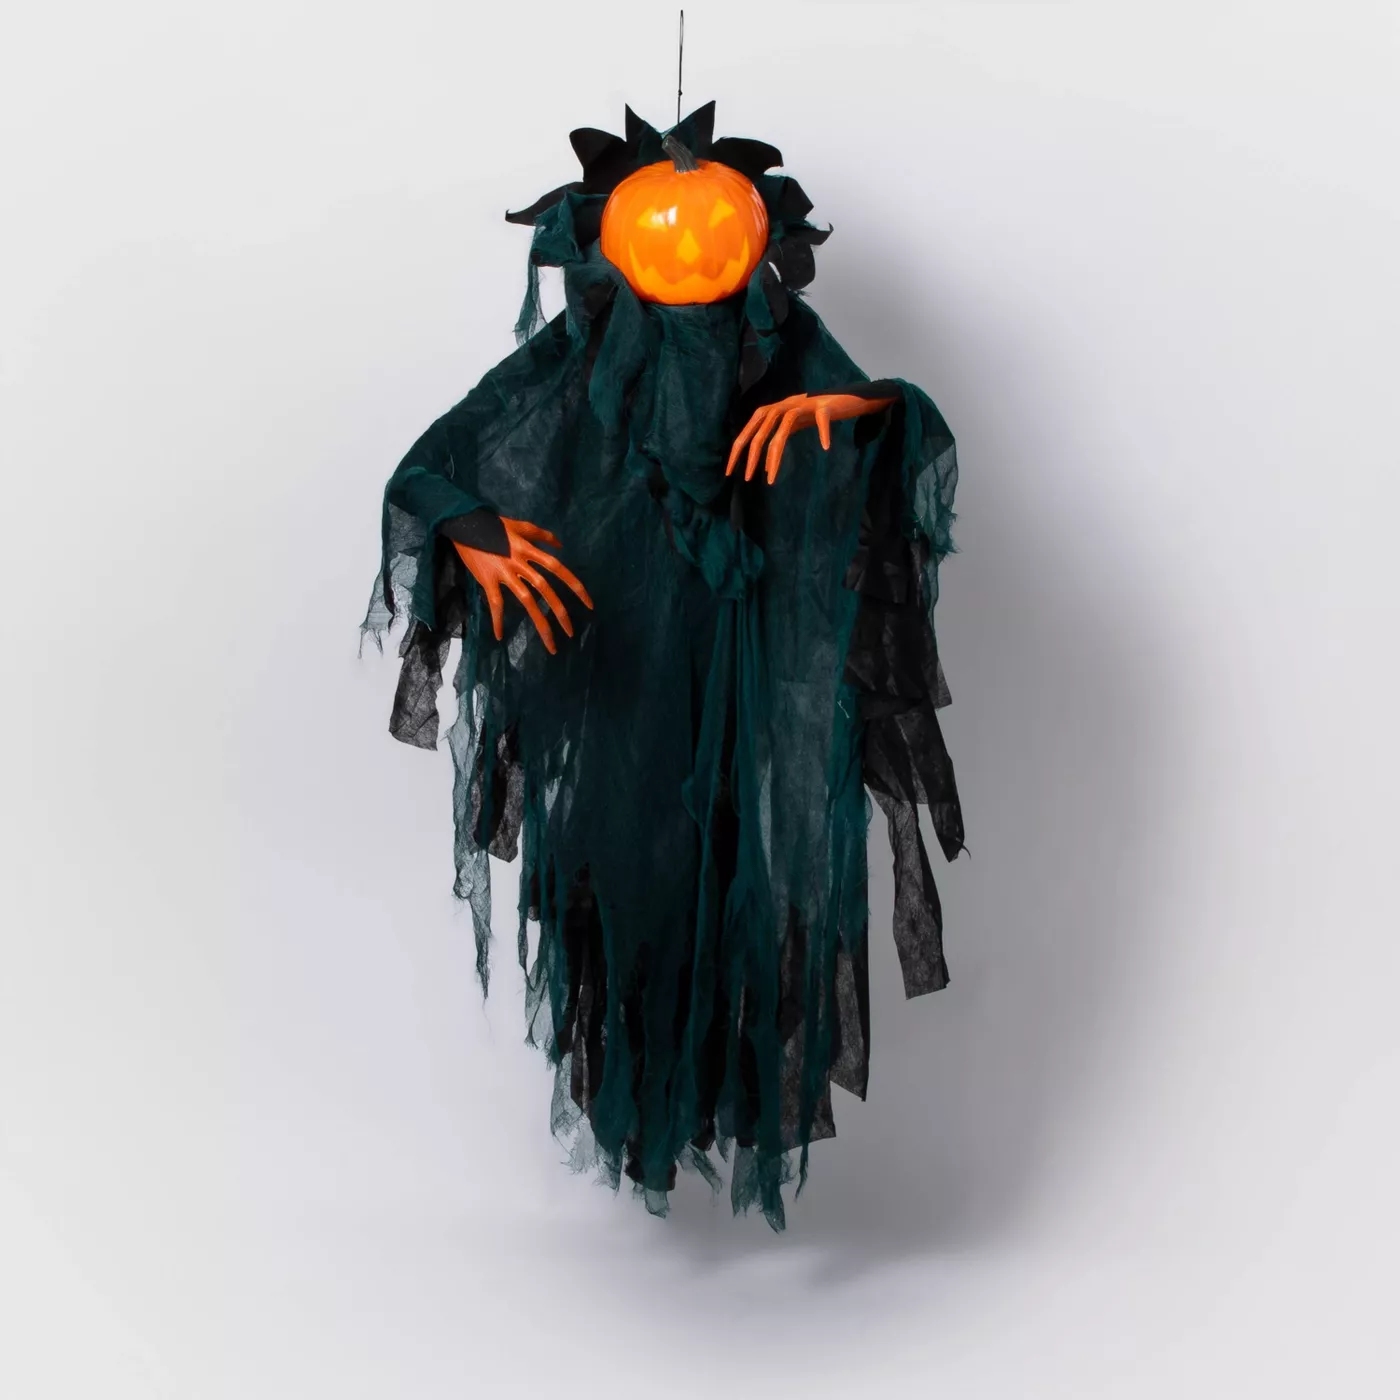 Animated (Lights & Sounds) Decorative Halloween Pumpkin Ghoul - Hyde & EEK! Boutique™ - image 1 of 3